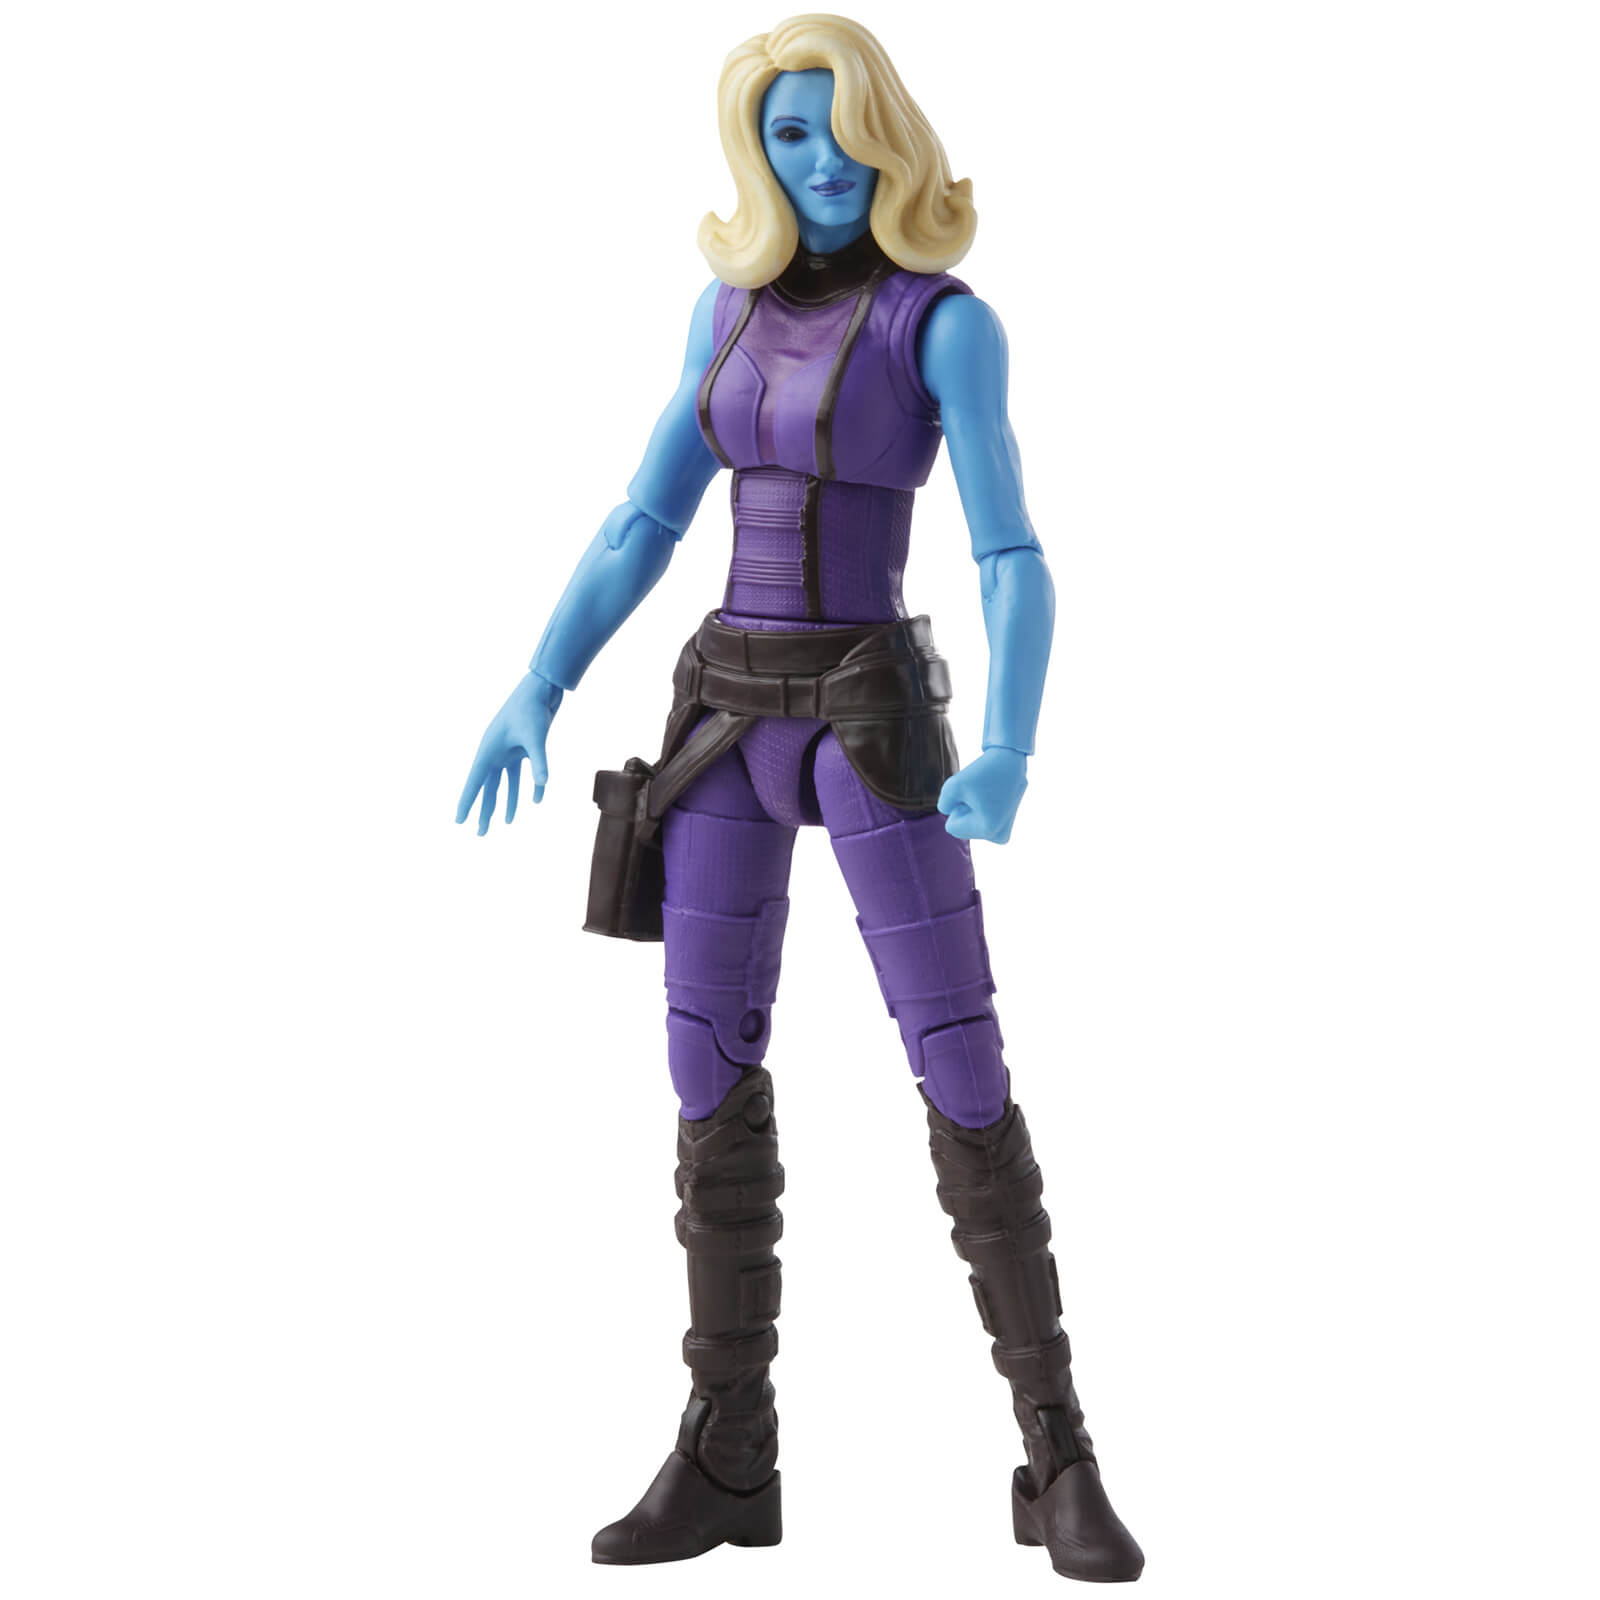 Image of Hasbro Marvel Legends Series Heist Nebula What If Action Figure and Build-a-Figure Parts